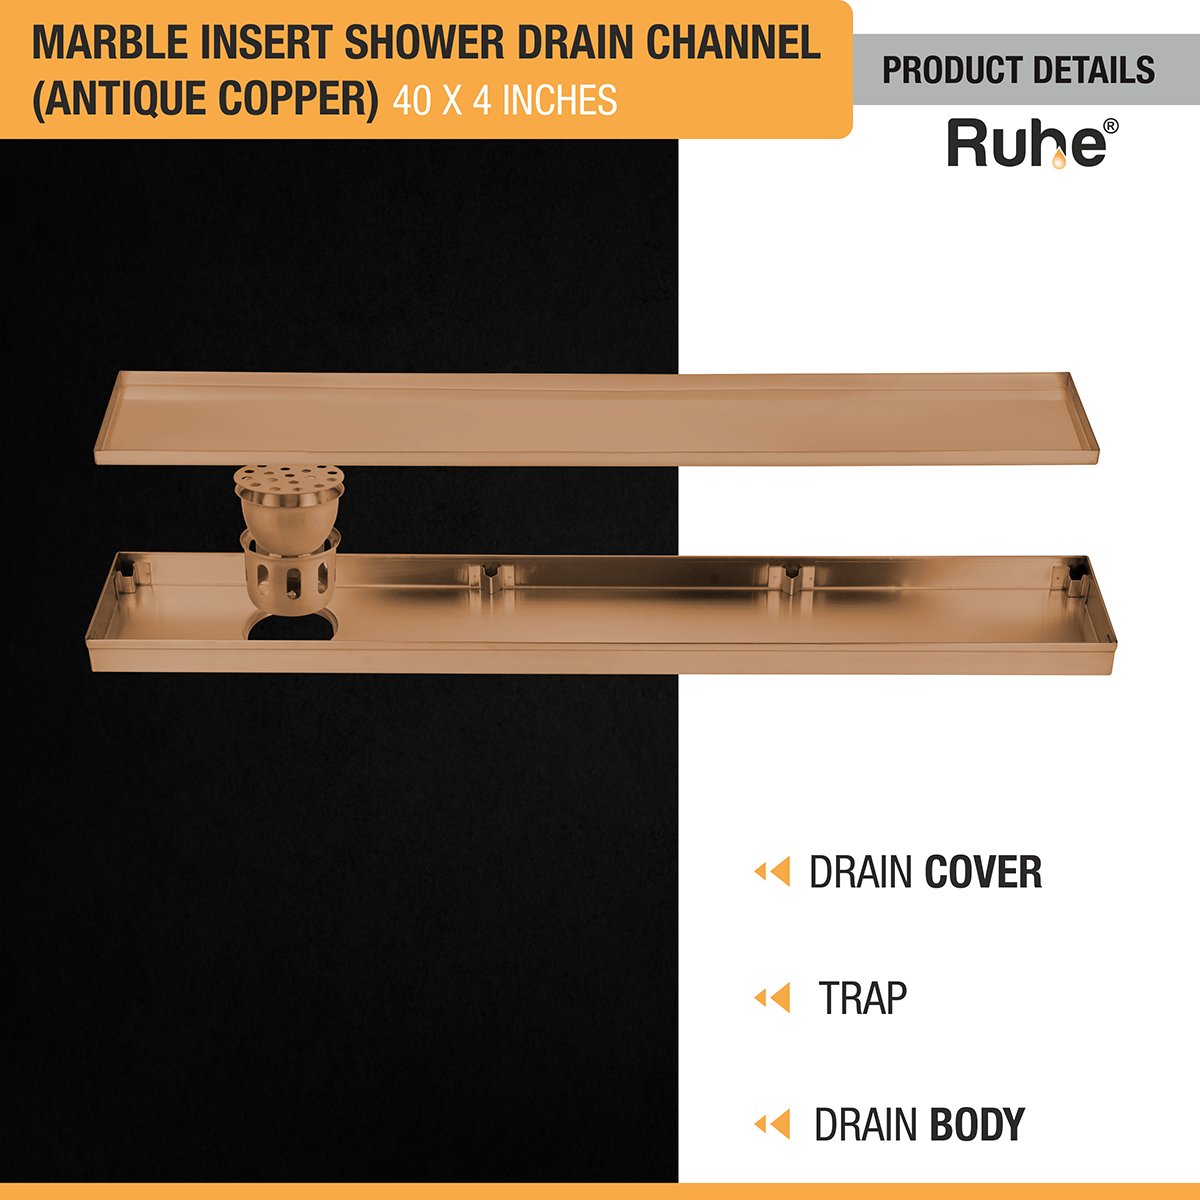 Marble Insert Shower Drain Channel (40 x 4 Inches) ROSE GOLD PVD Coated with drain cover, trap, and drain body